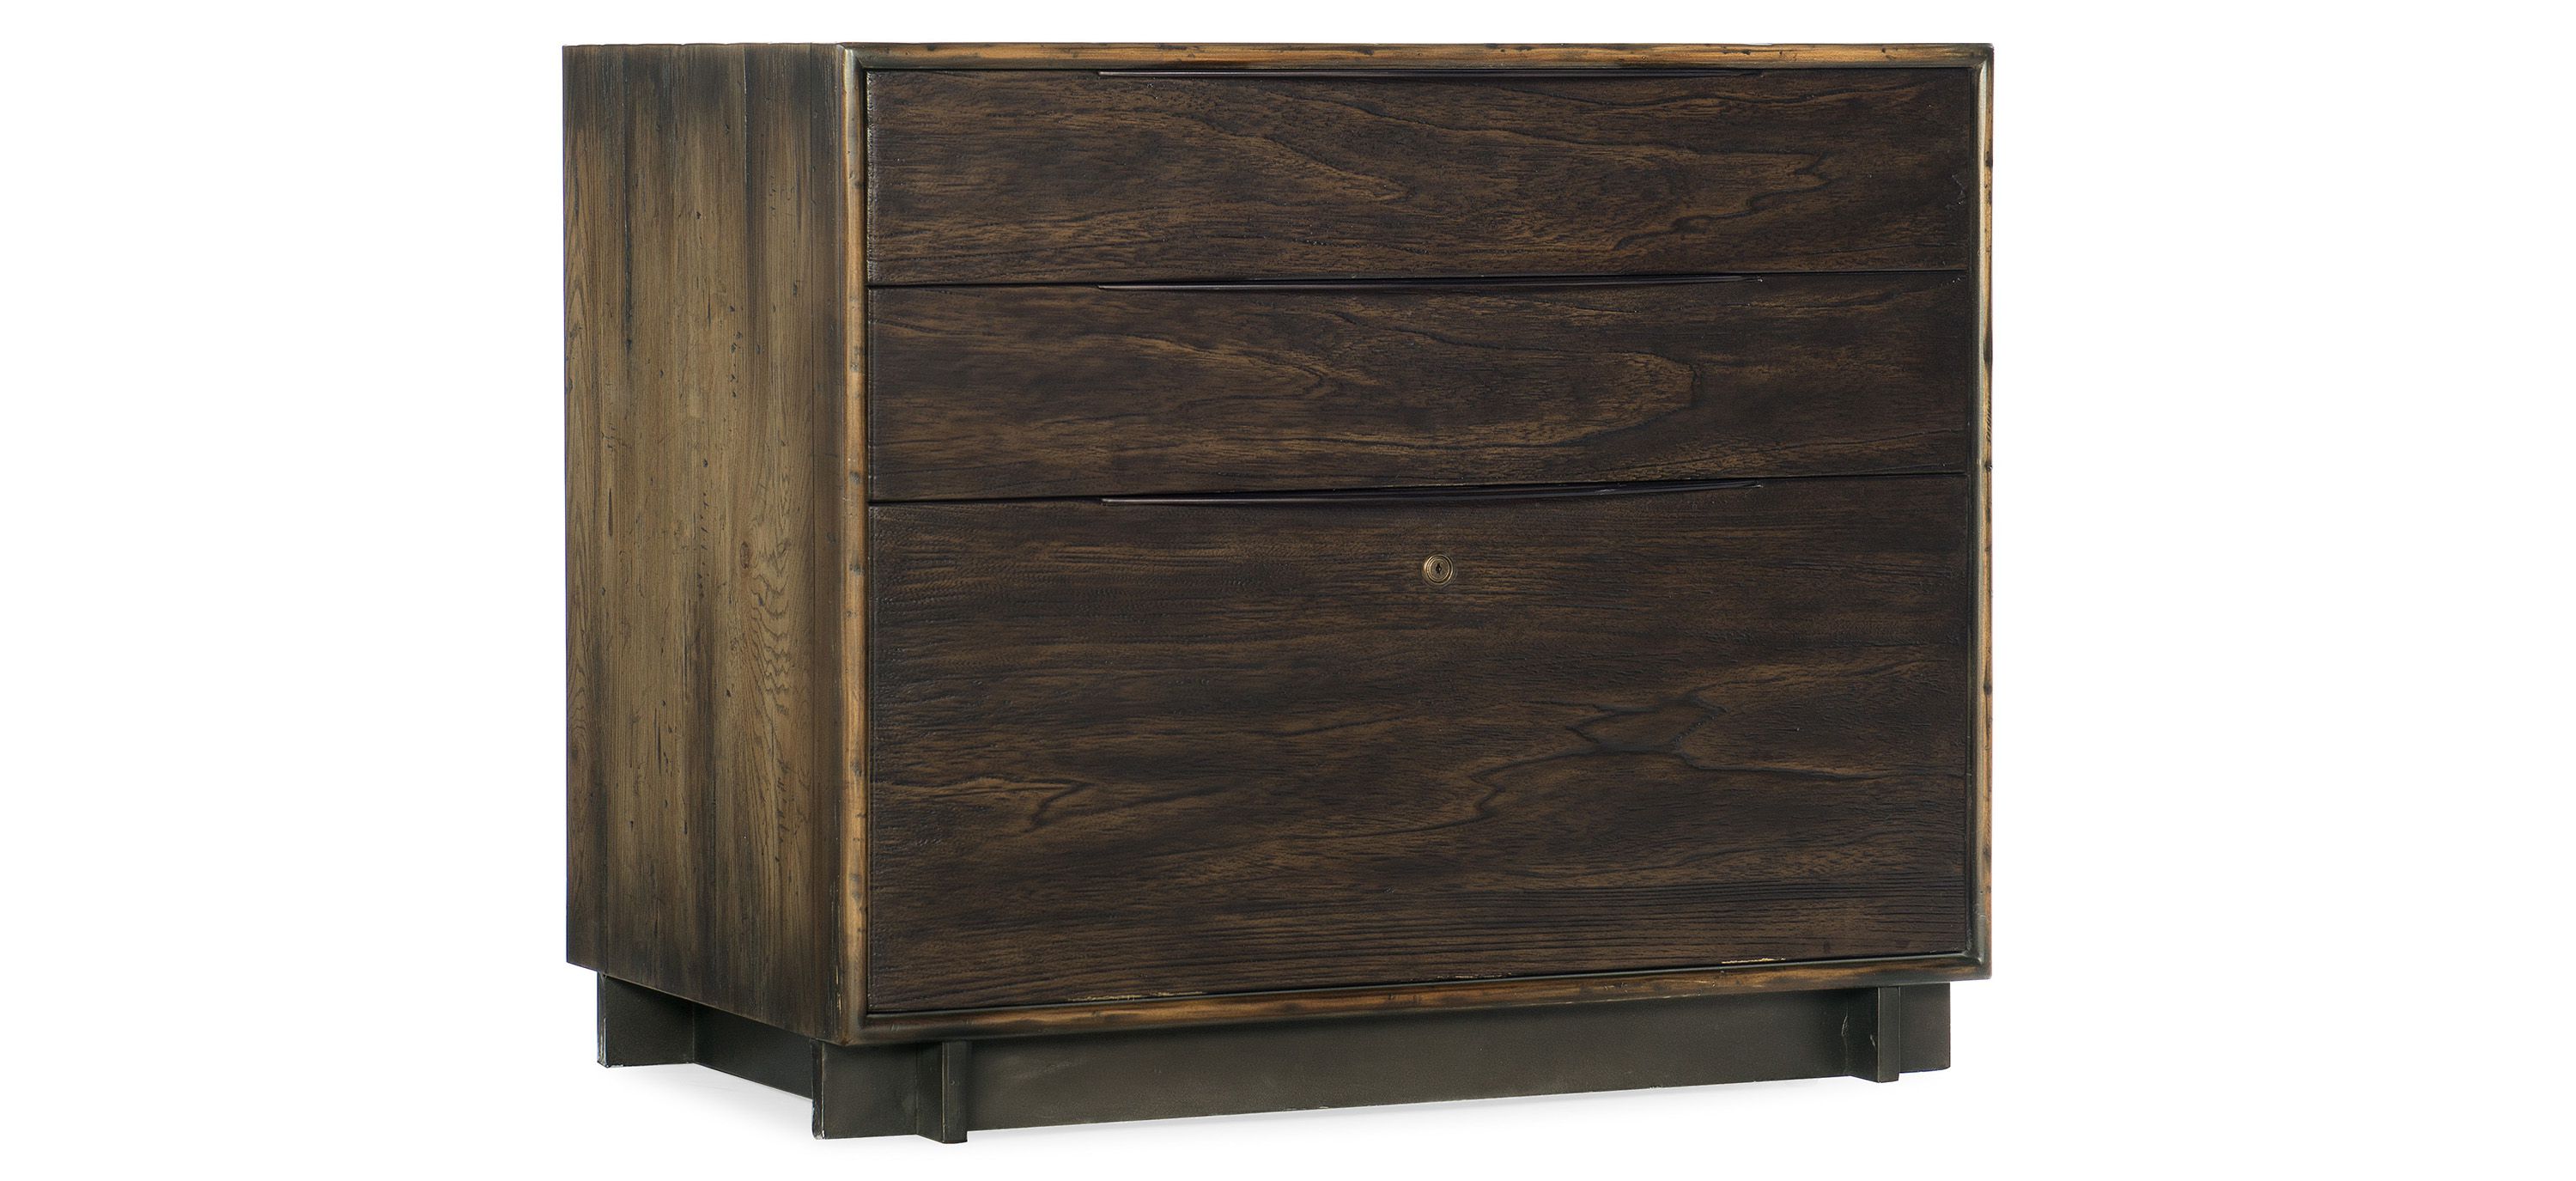 American Life Crafted Lateral File Cabinet